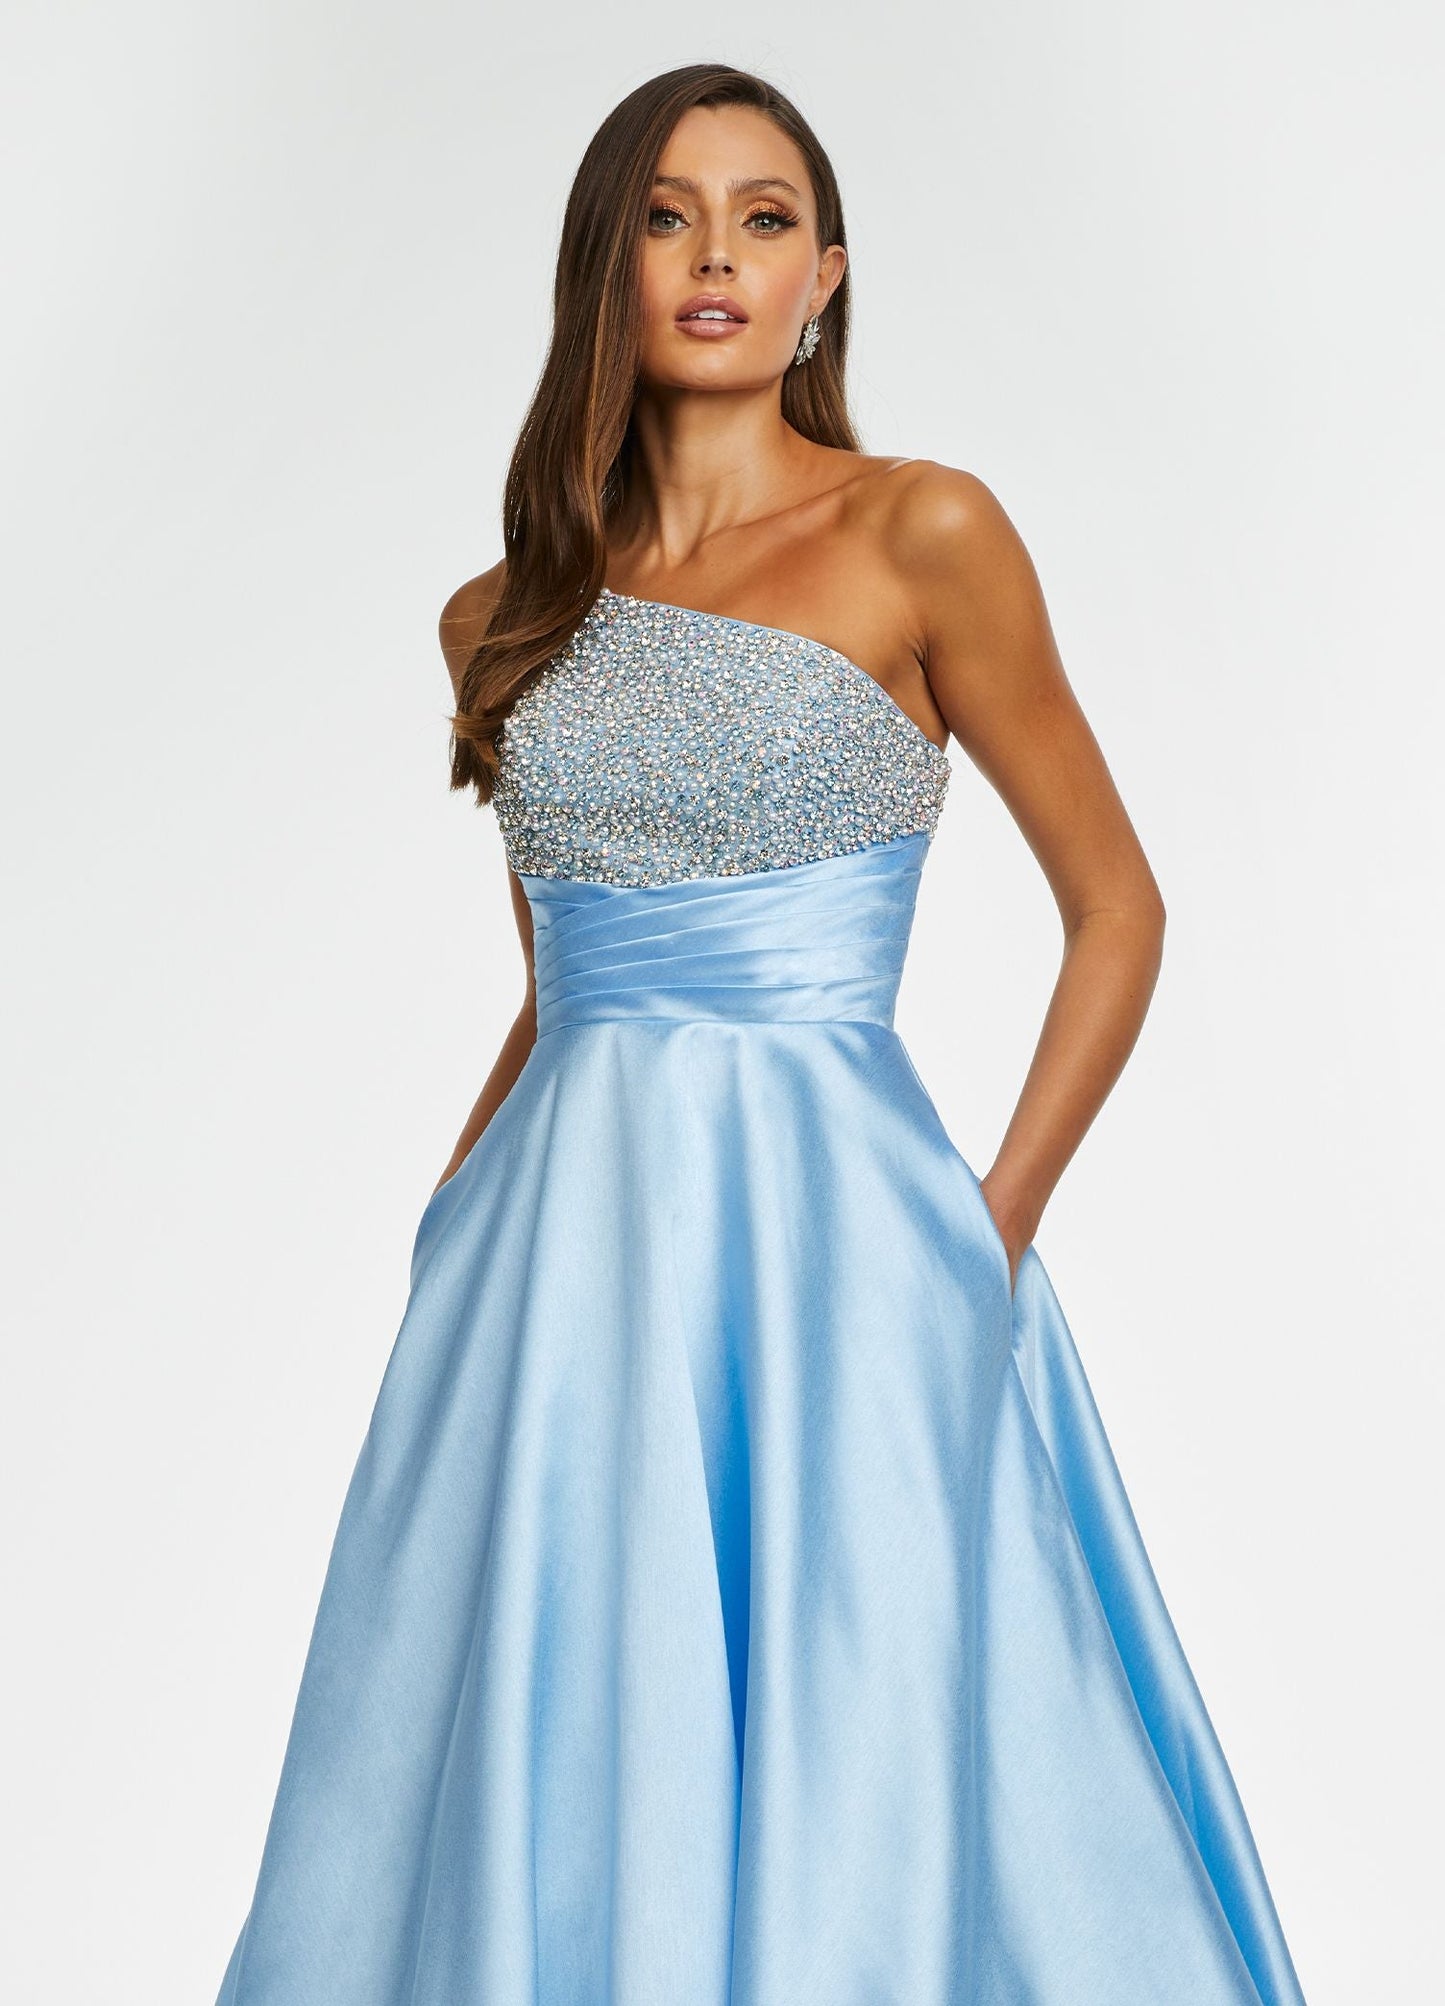 Ashley Lauren 11149 One Shoulder Ball Gown Prom Dress with Embellished Bodice  Sparkle in this one shoulder taffeta ball gown. The elegantly encrusted bustier is embellished with pearls and crystals that give way to wrap waistline. Did we mention is has pockets?!  One Shoulder Beaded Bustier Shimmer Taffeta Train Colors:  Sky, Aqua, Pink, White Sizes:  0-16